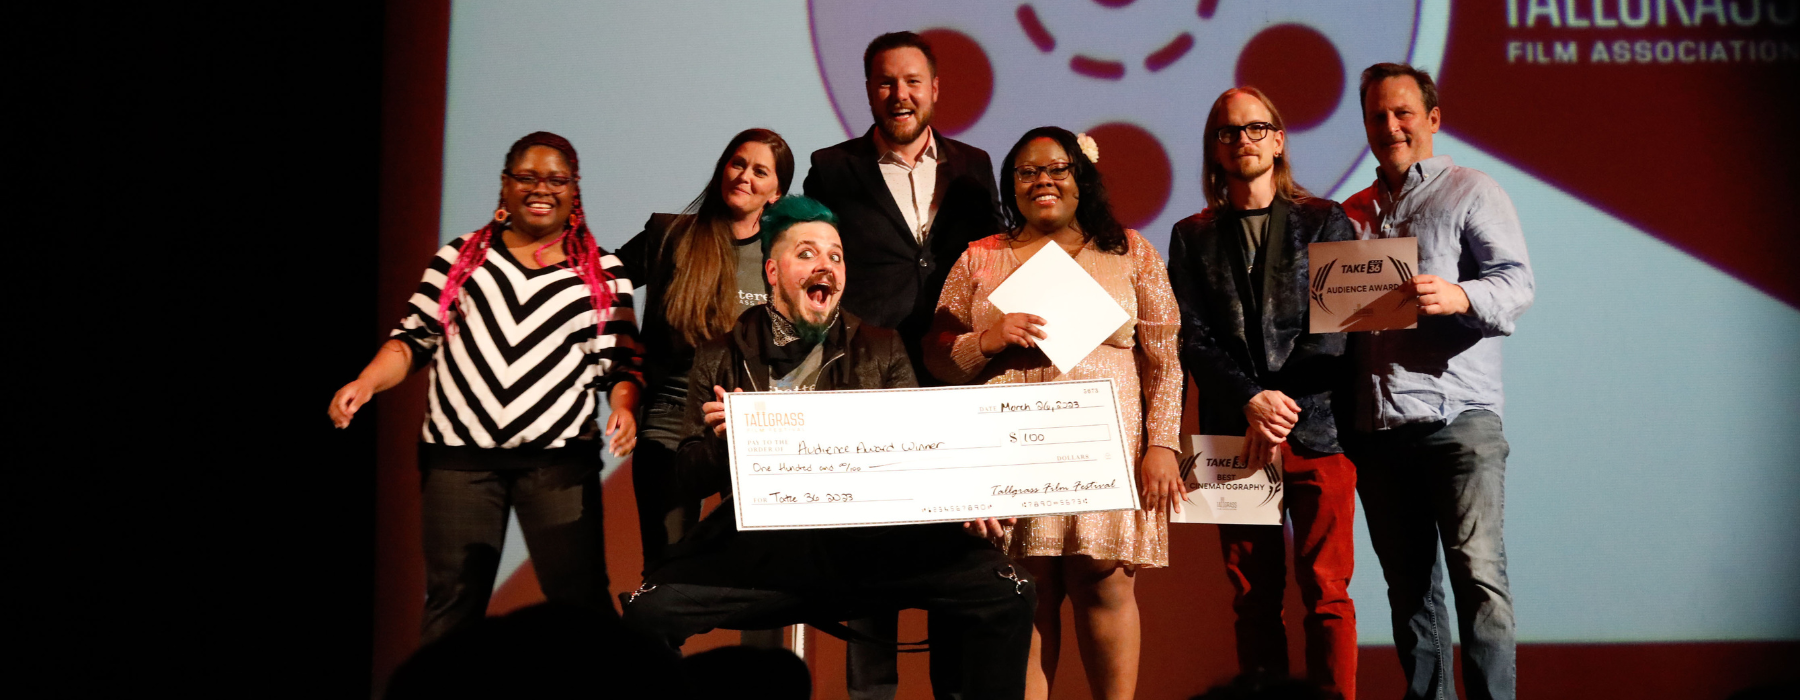 Filmmakers, host and judges pose on stage at the Orpheum with a big check for Audience Award winner at Take 36.